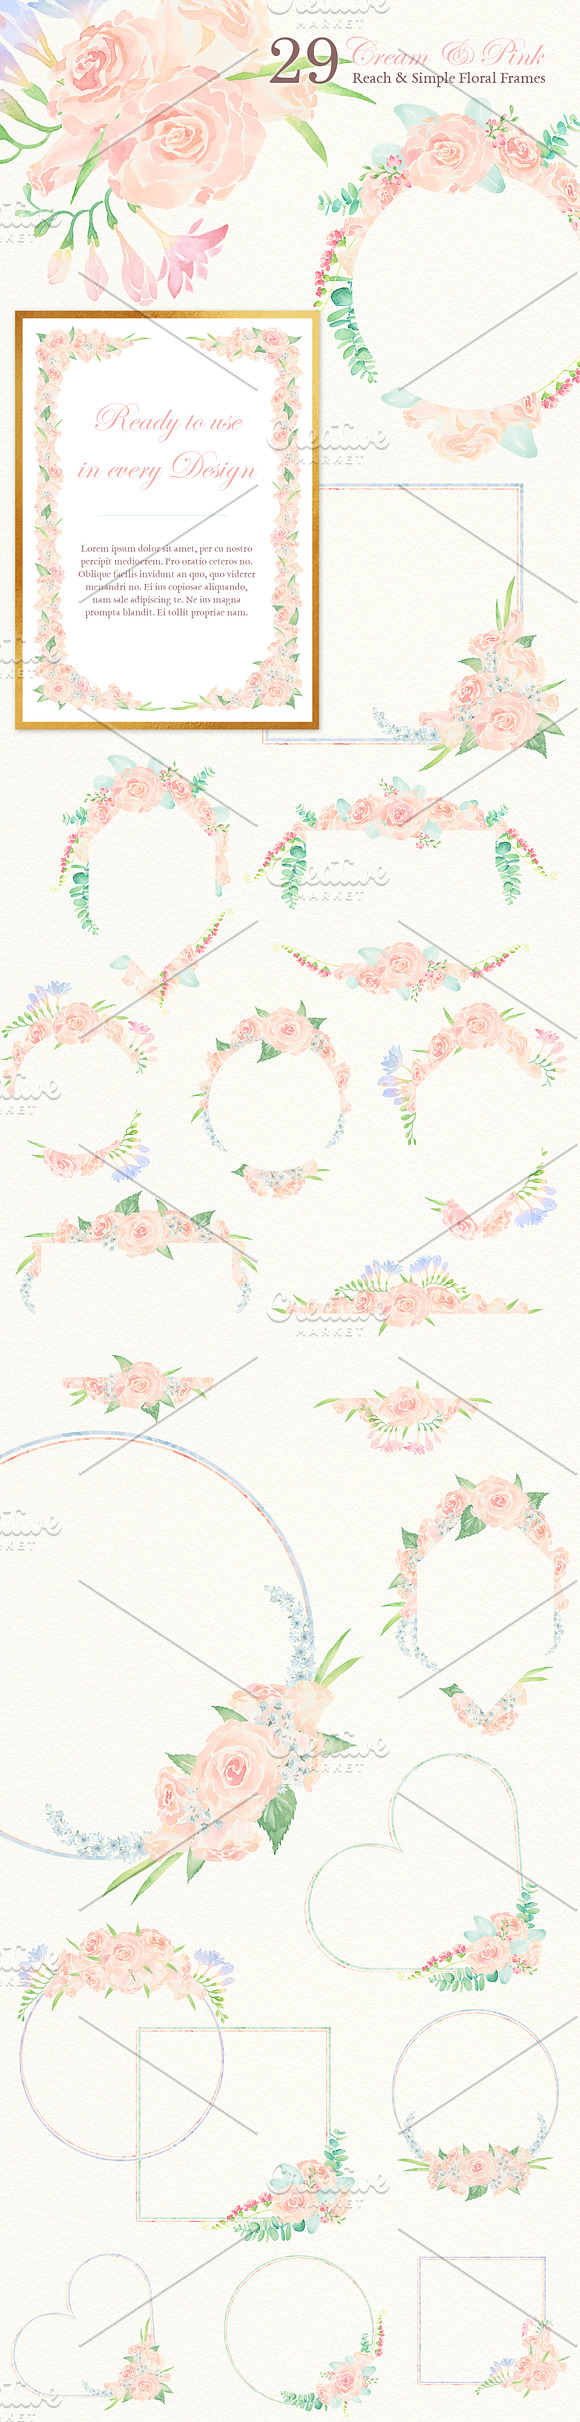 Watercolor Wedding Floral Ornaments in Illustrations - product preview 2